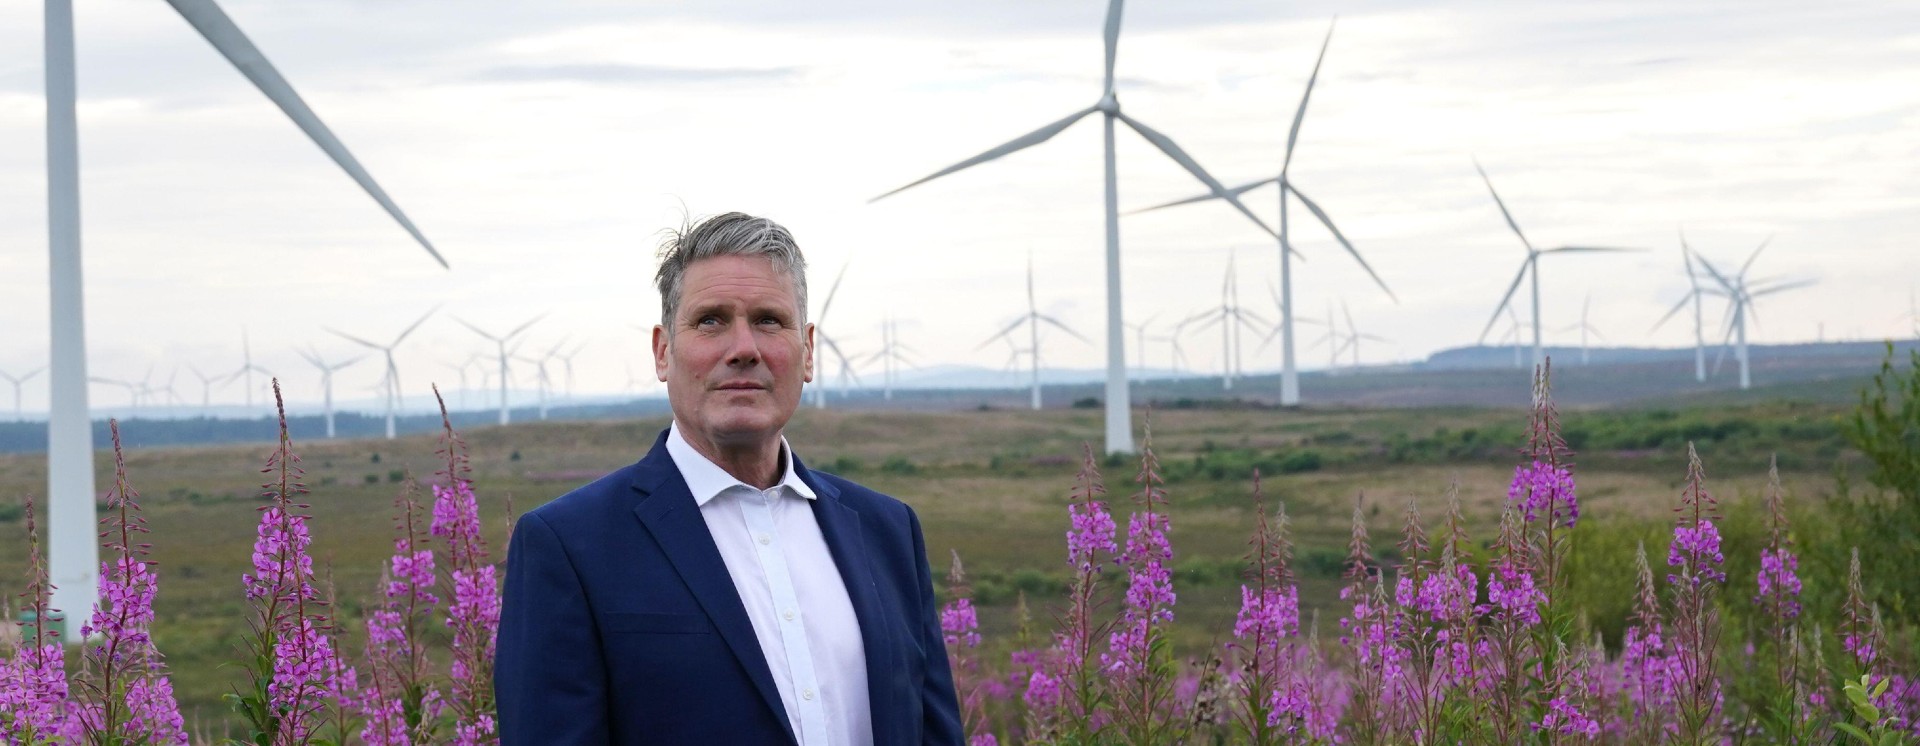 Keir Starmer standing in front of wind turbines